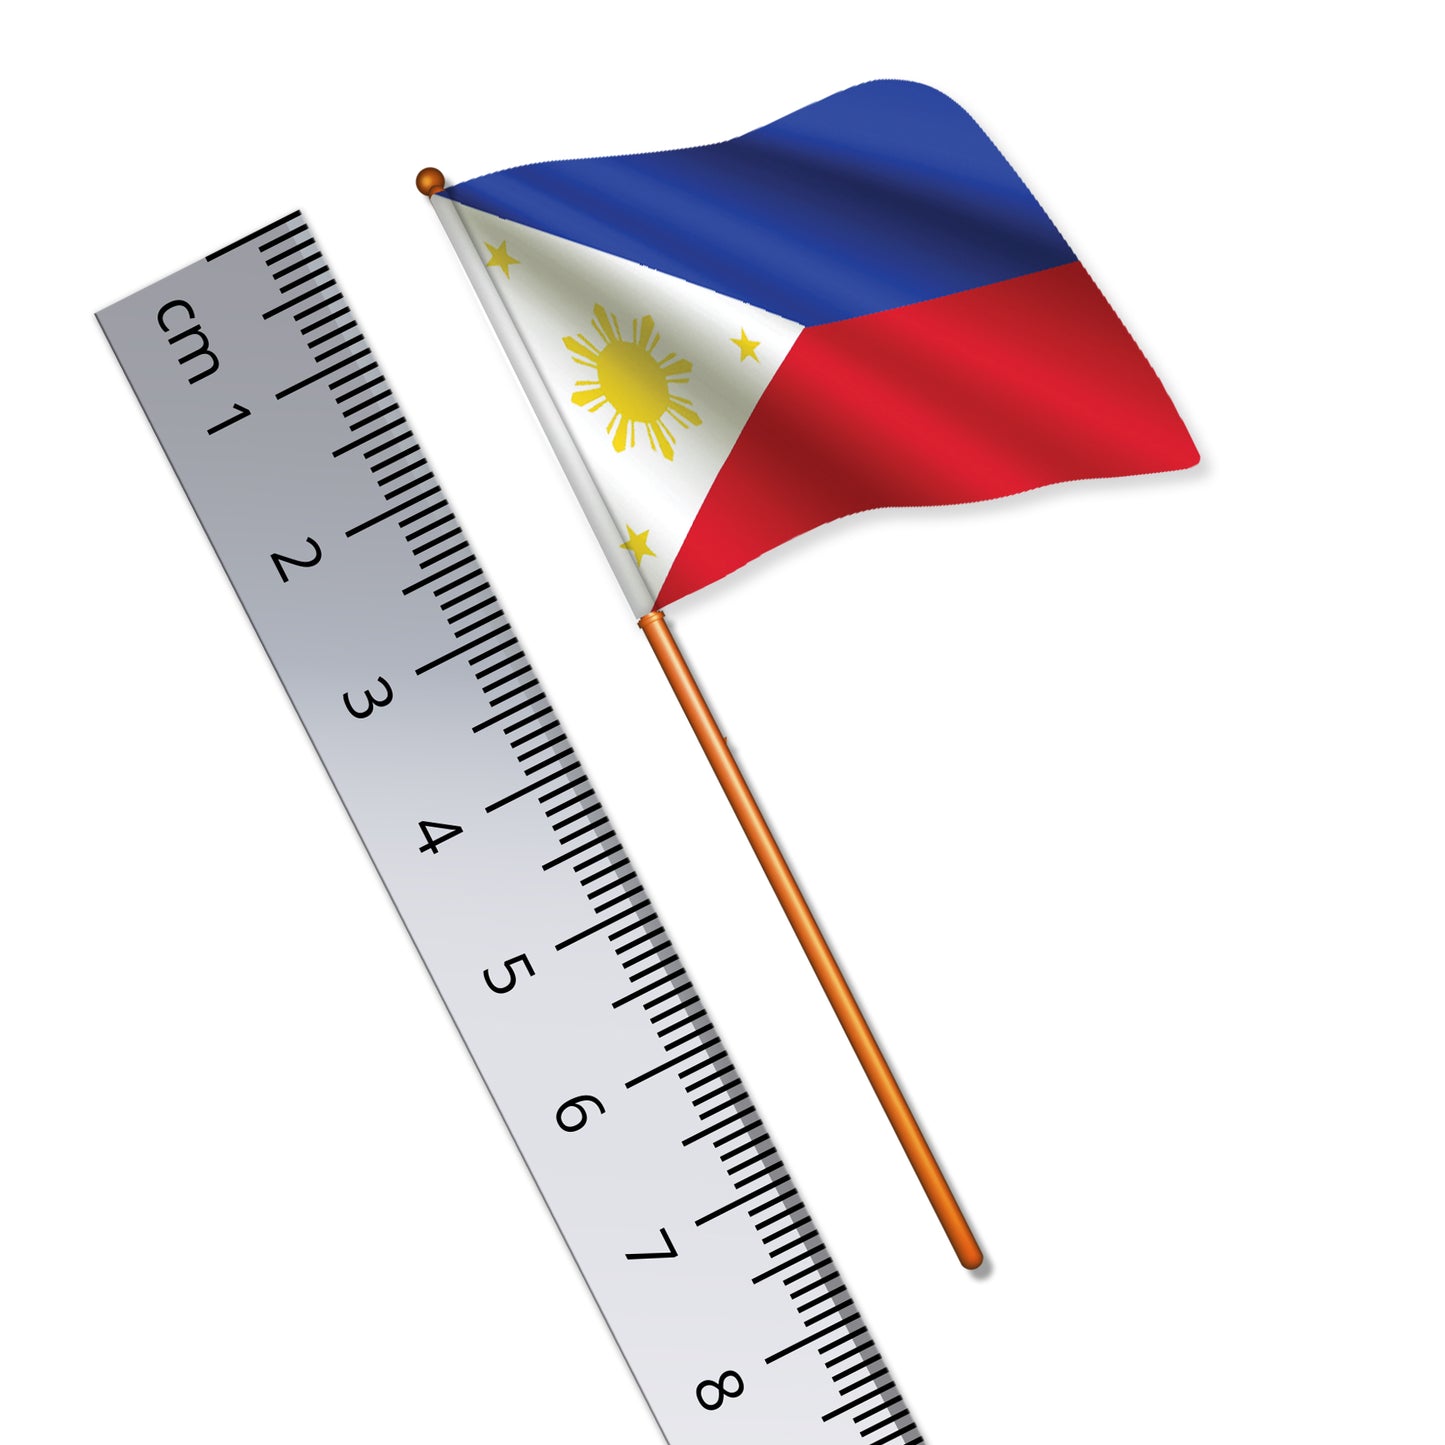 Philippines / Filipino Flag (National Flag of the Philippines)